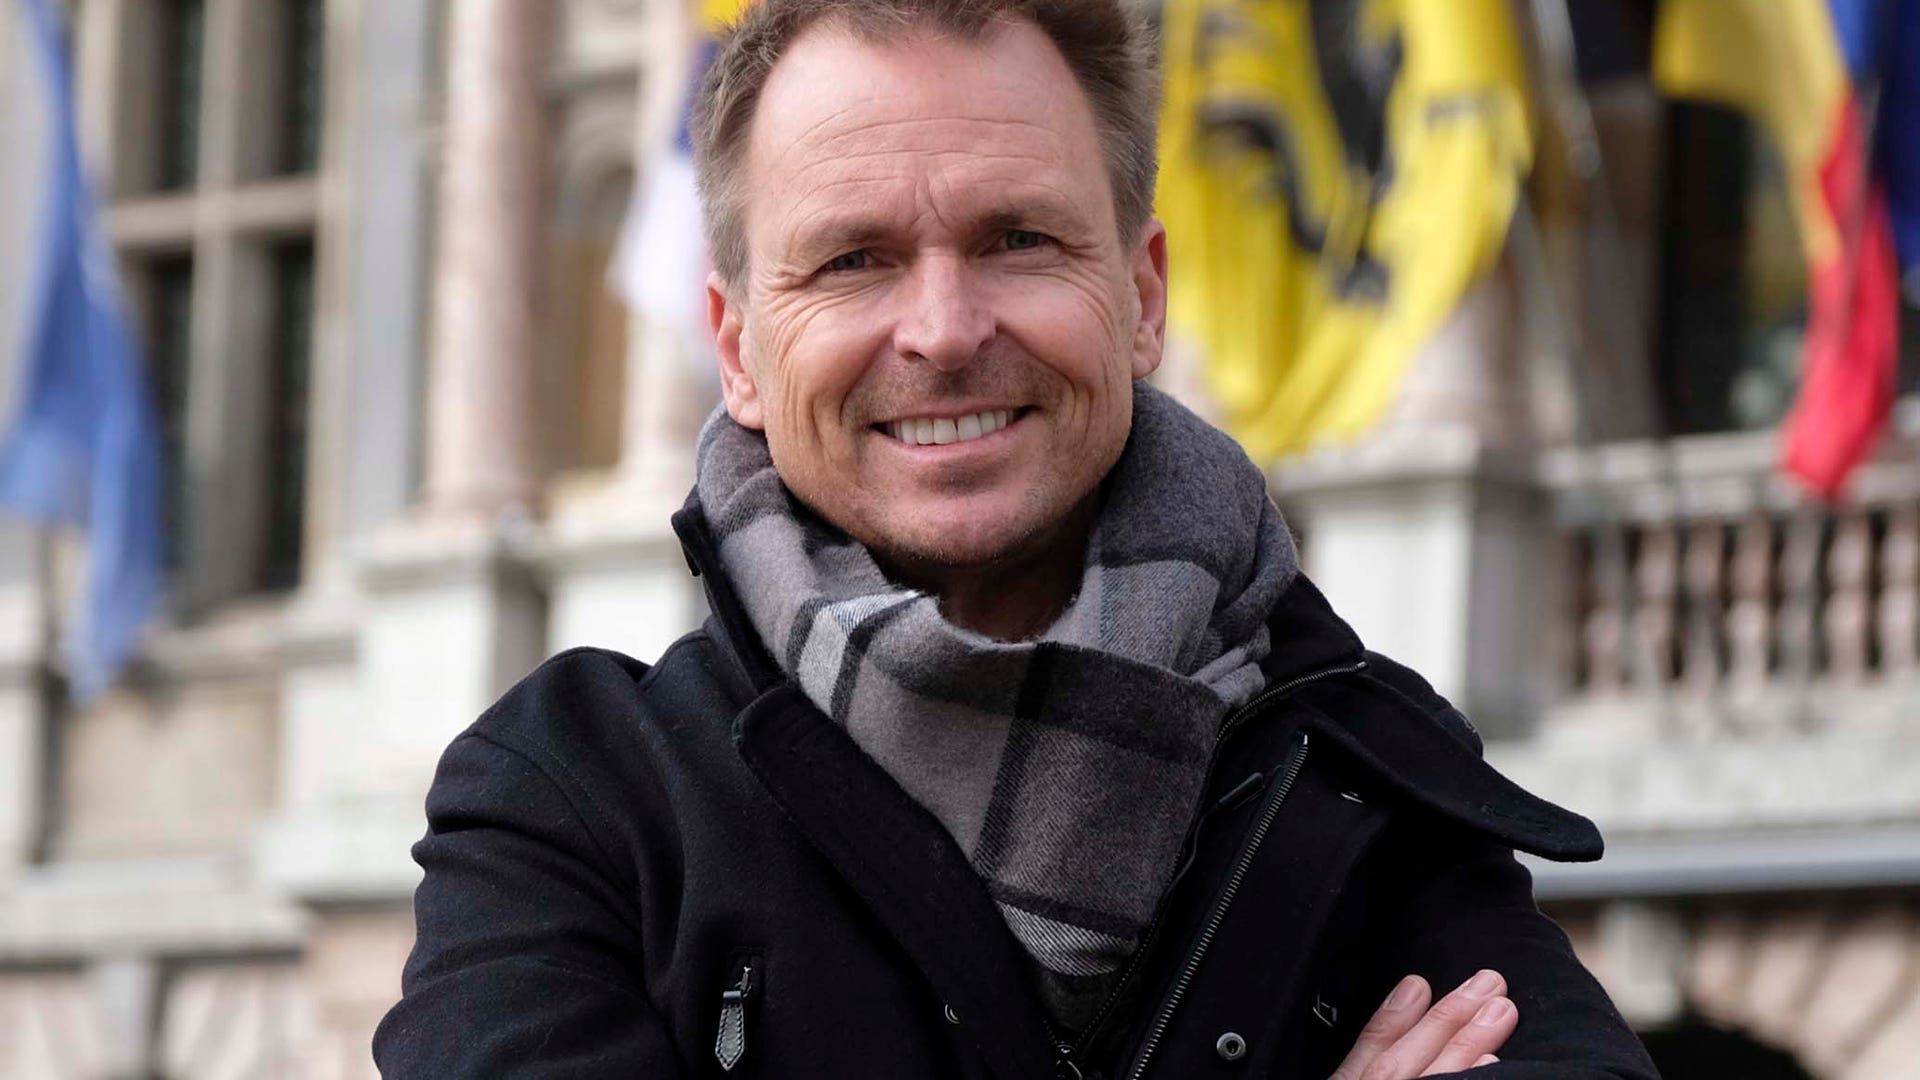 Phil Keoghan, The Amazing Race​